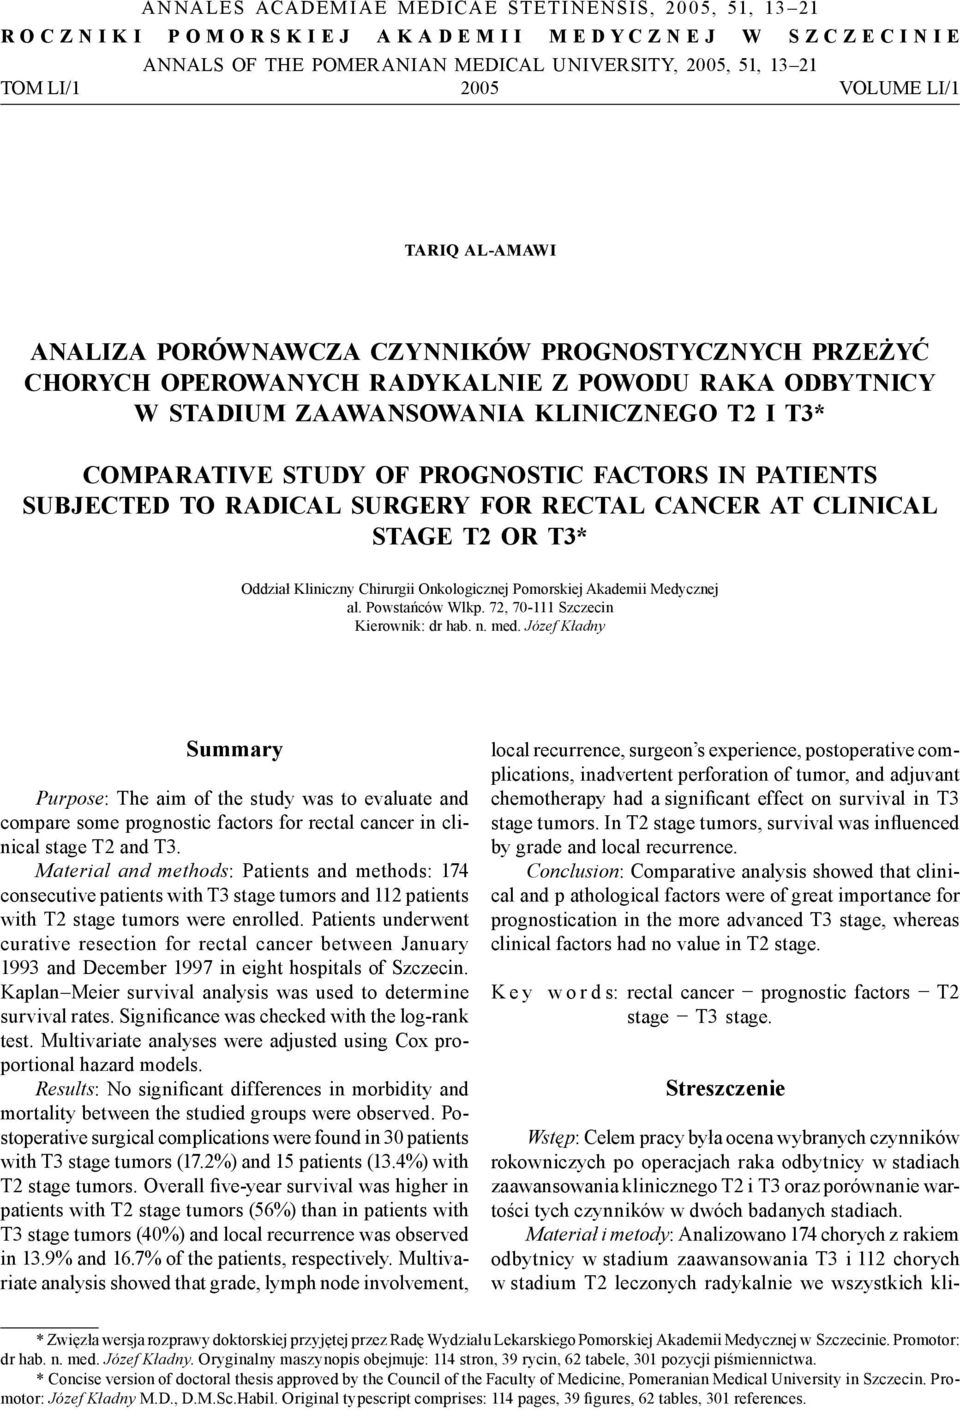 klinicznego T2 i T3* Comparative study of prognostic factors in patients subjected to radical surgery for rectal cancer at clinical stage T2 or T3* Oddział Kliniczny Chirurgii Onkologicznej